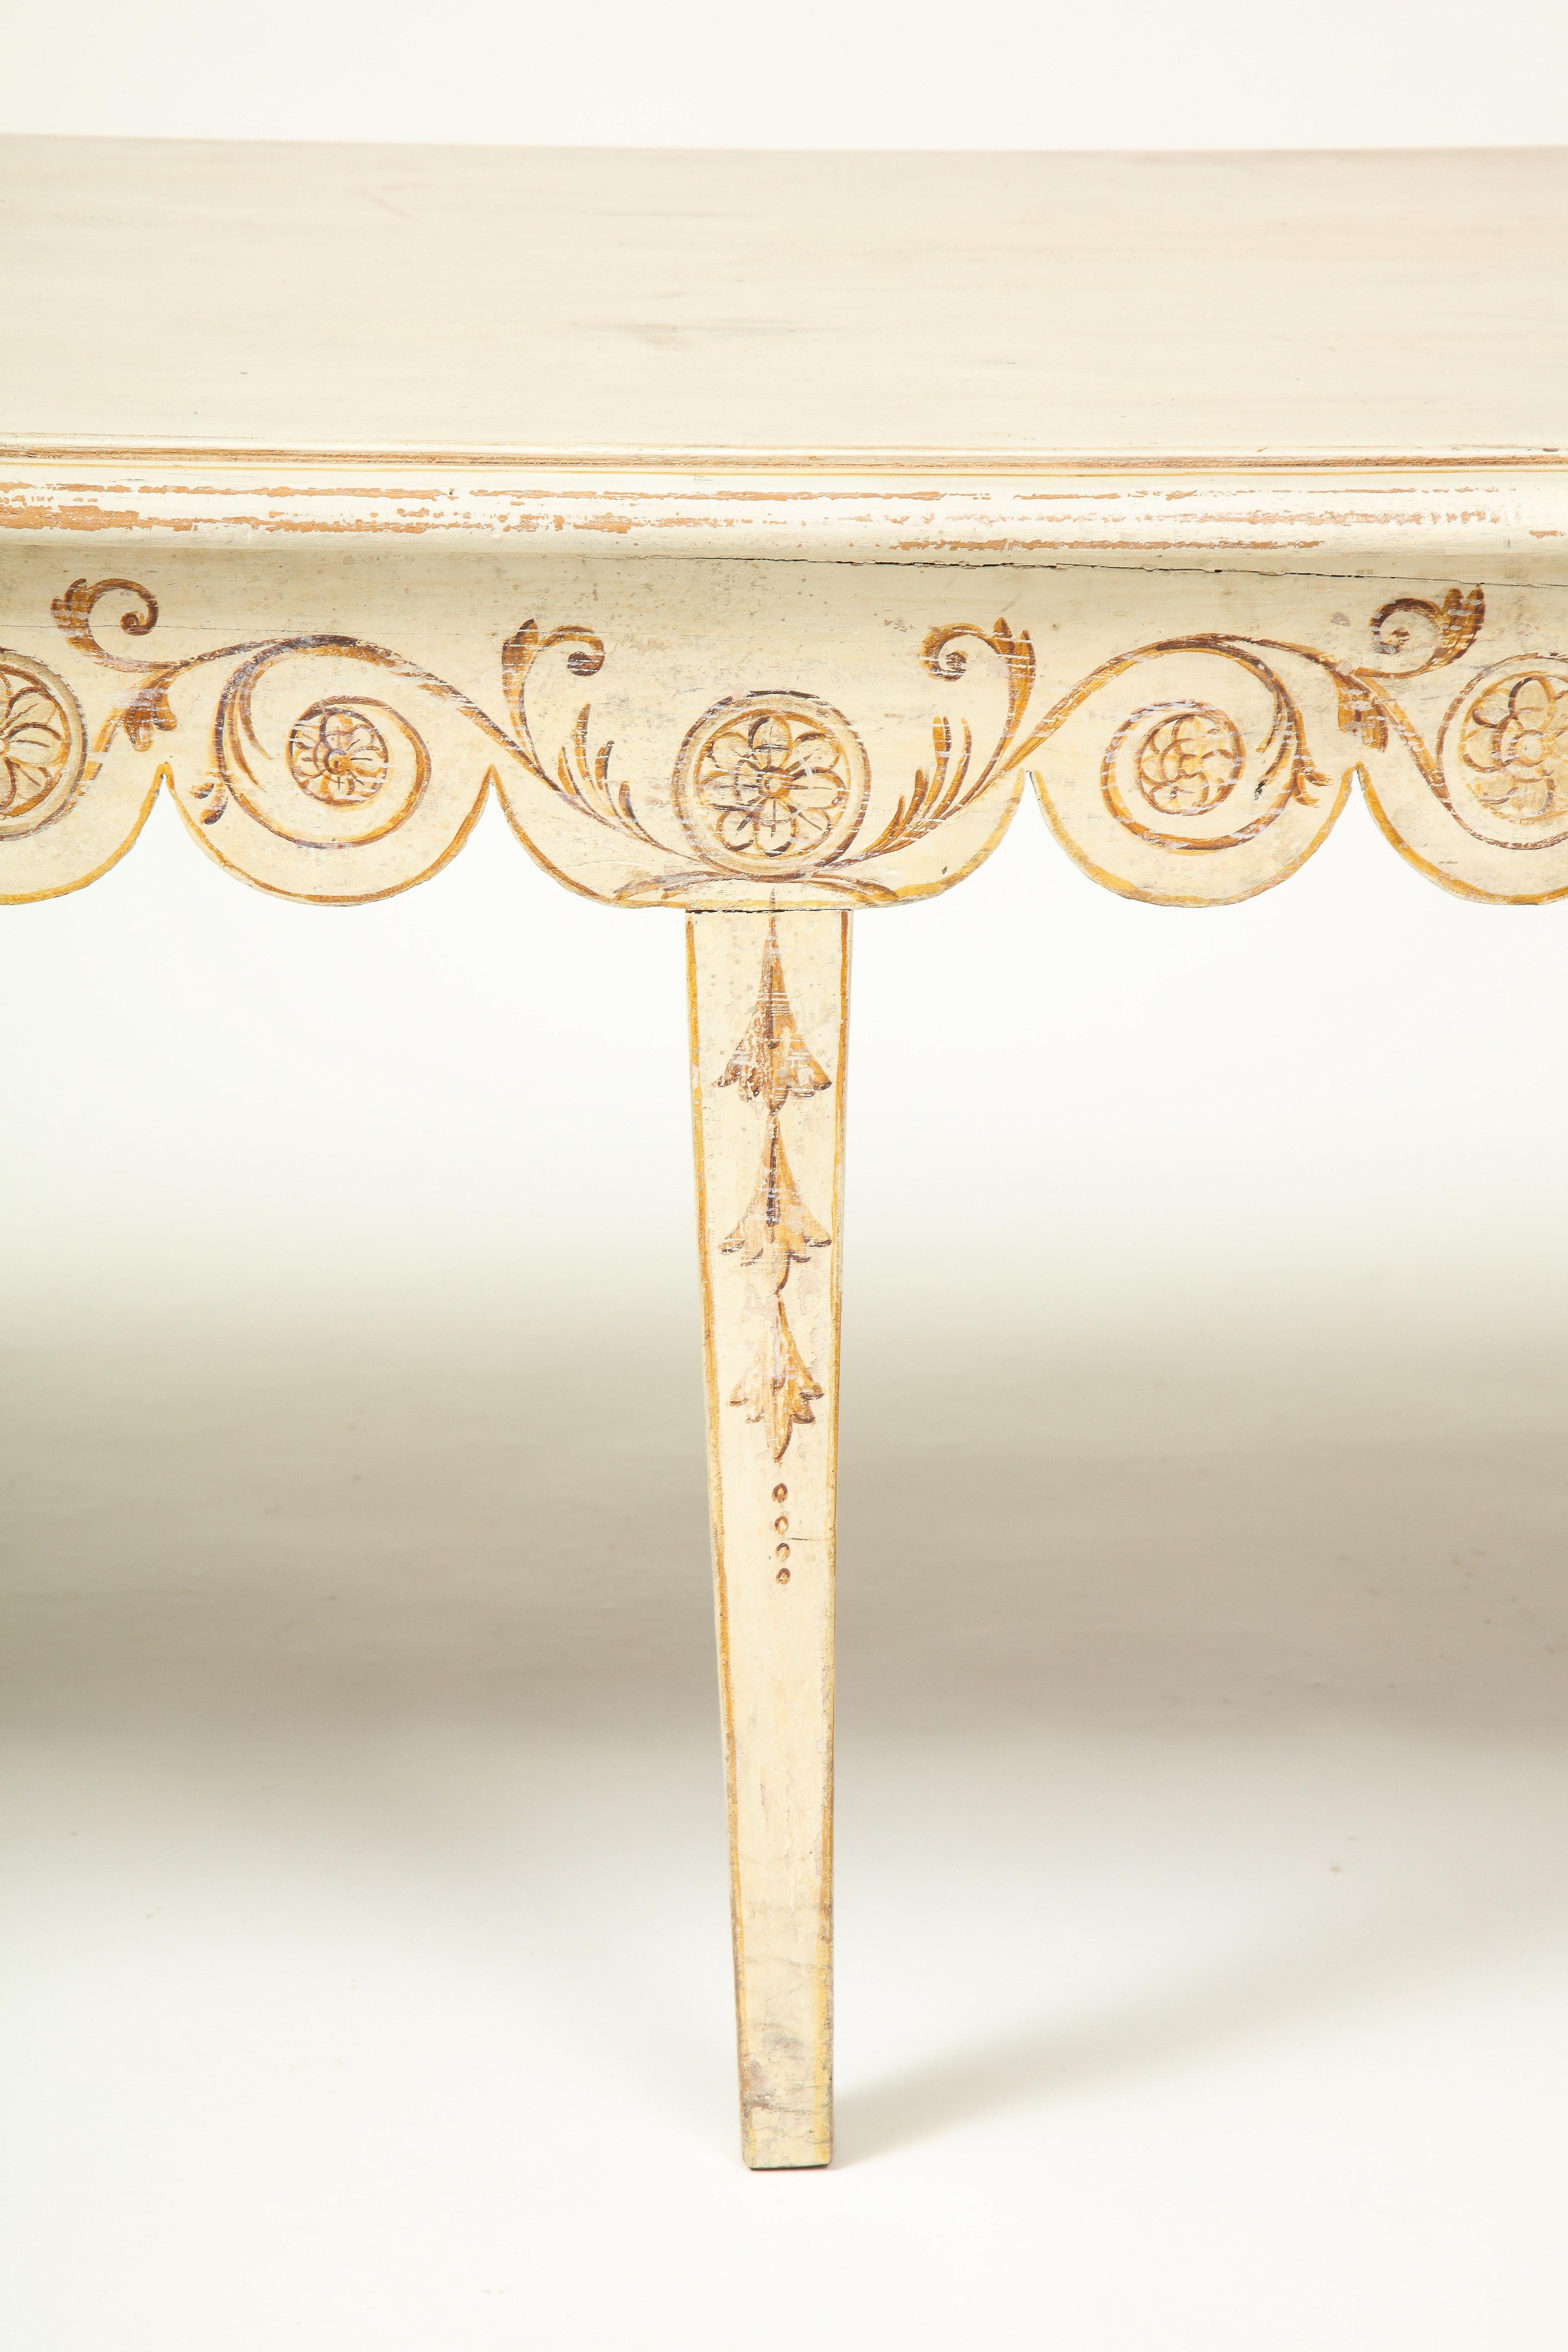 Attributed to Colefax & Fowler. The rectangular seat over a scalloped seat rail painted in ochre with scrolling foliage and flowerhead roundels; raised on square tapering legs with bellflower garland decoration.

Provenance: From the Collection of